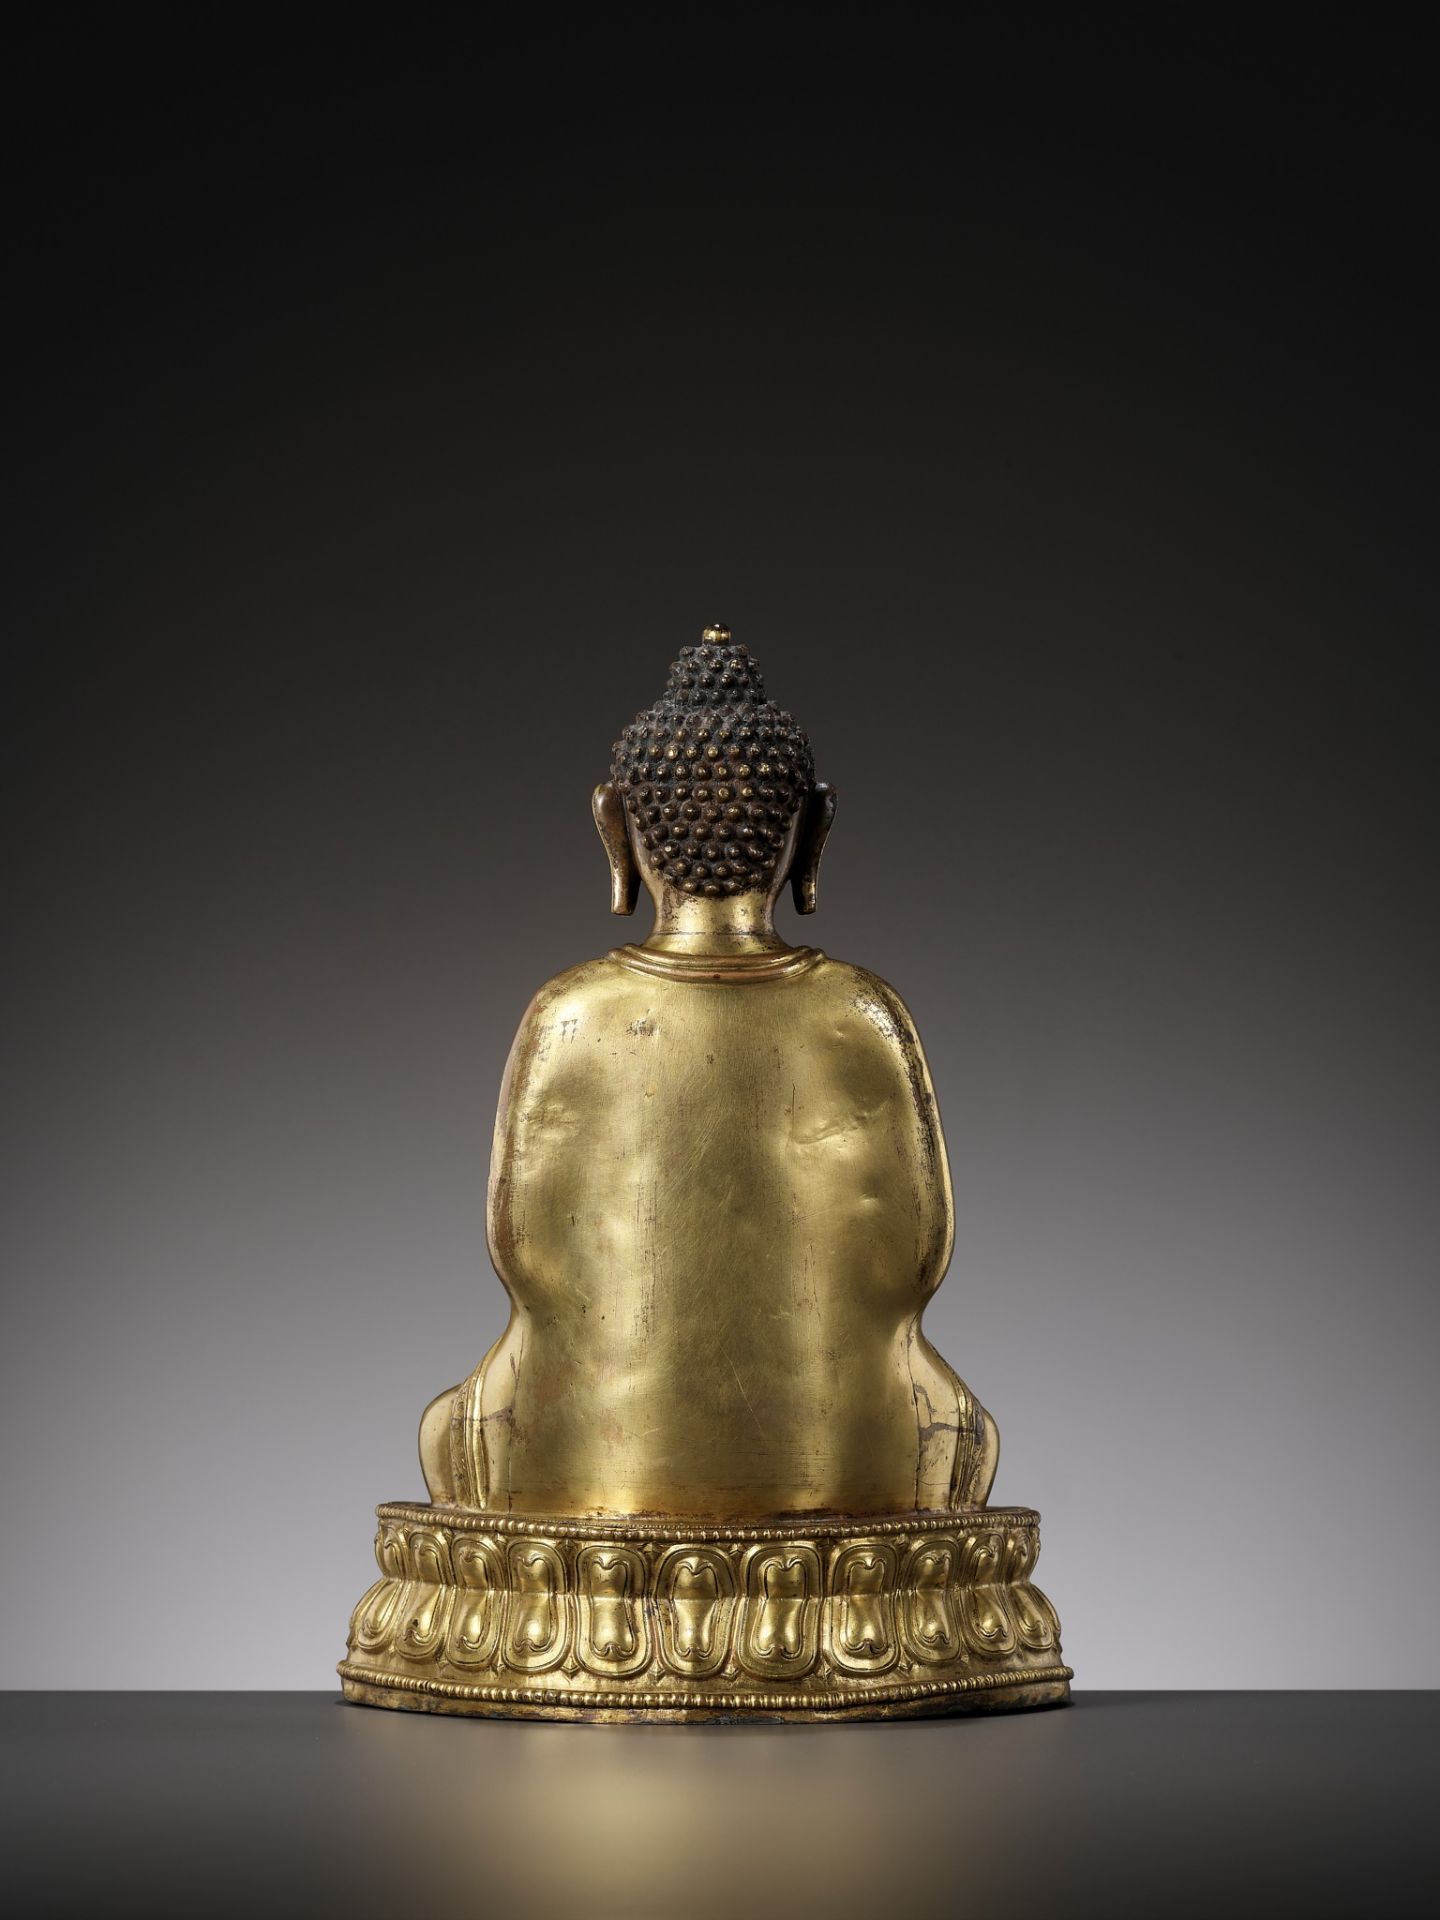 A GILT COPPER-ALLOY REPOUSSE FIGURE OF BUDDHA AMITABHA, WITH AN INSCRIPTION REFERRING TO THE SECOND - Image 12 of 16